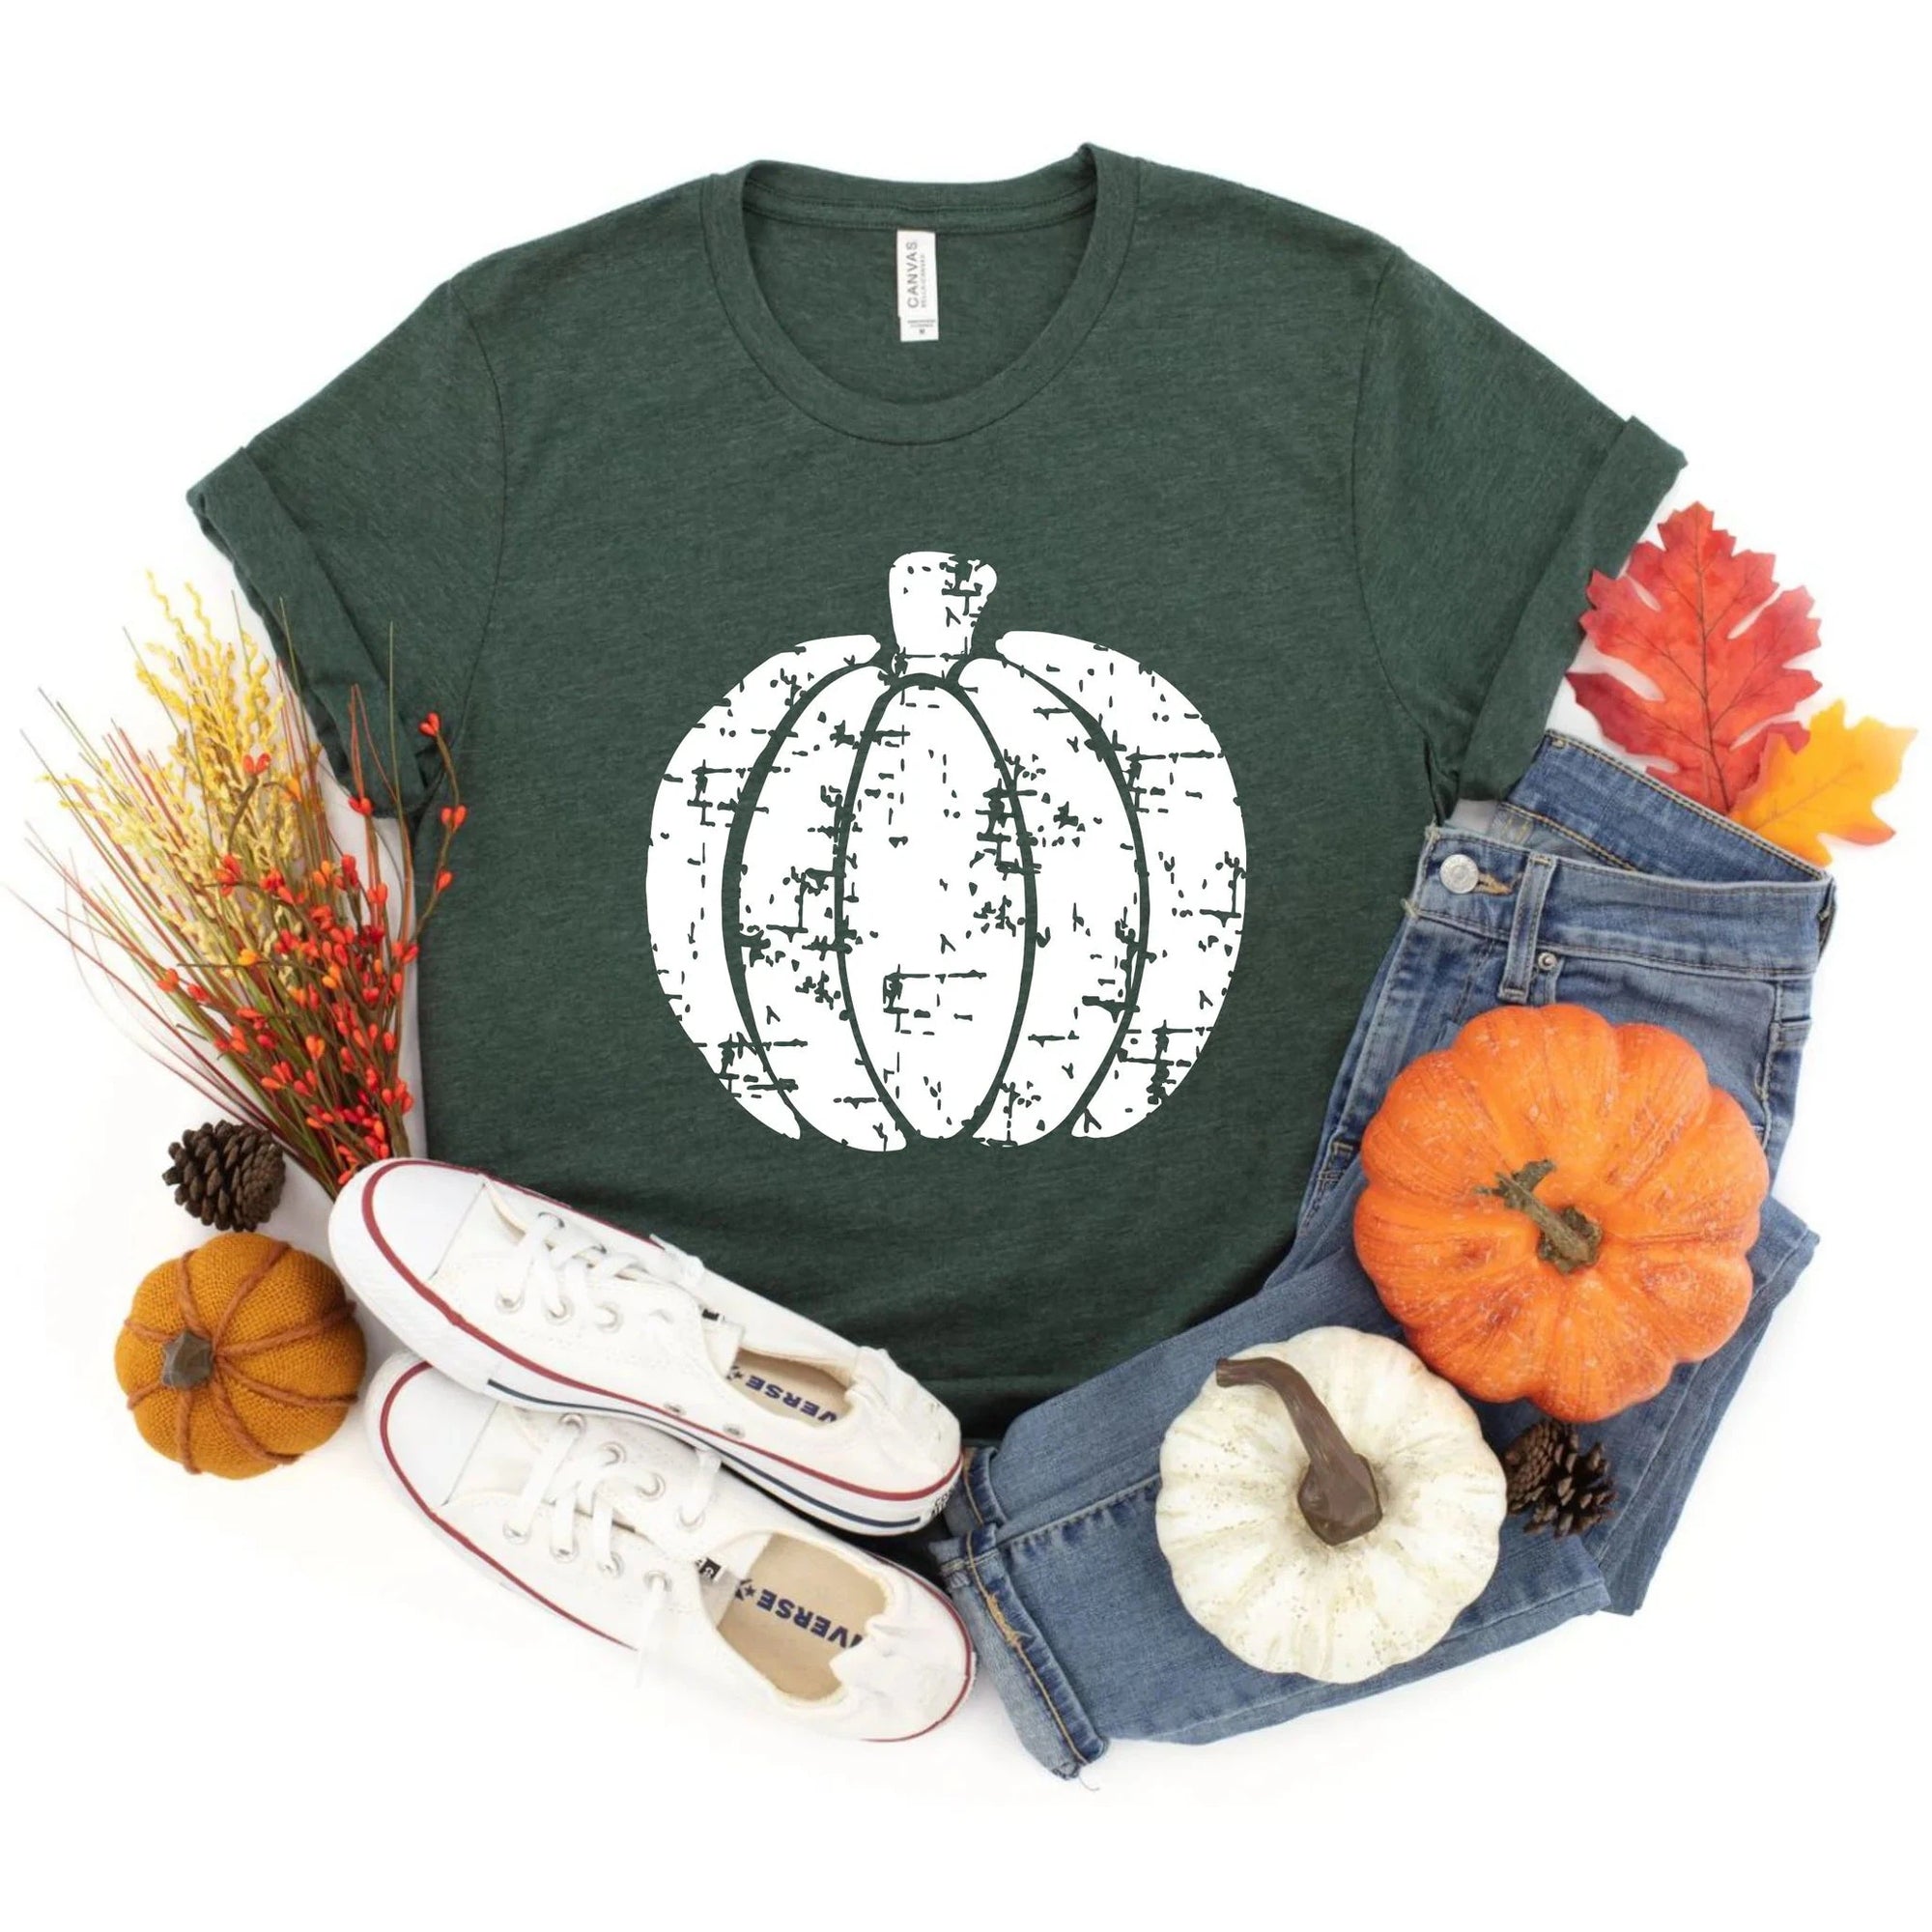 Grunge/distressed pumpkin Graphic Tee with color options